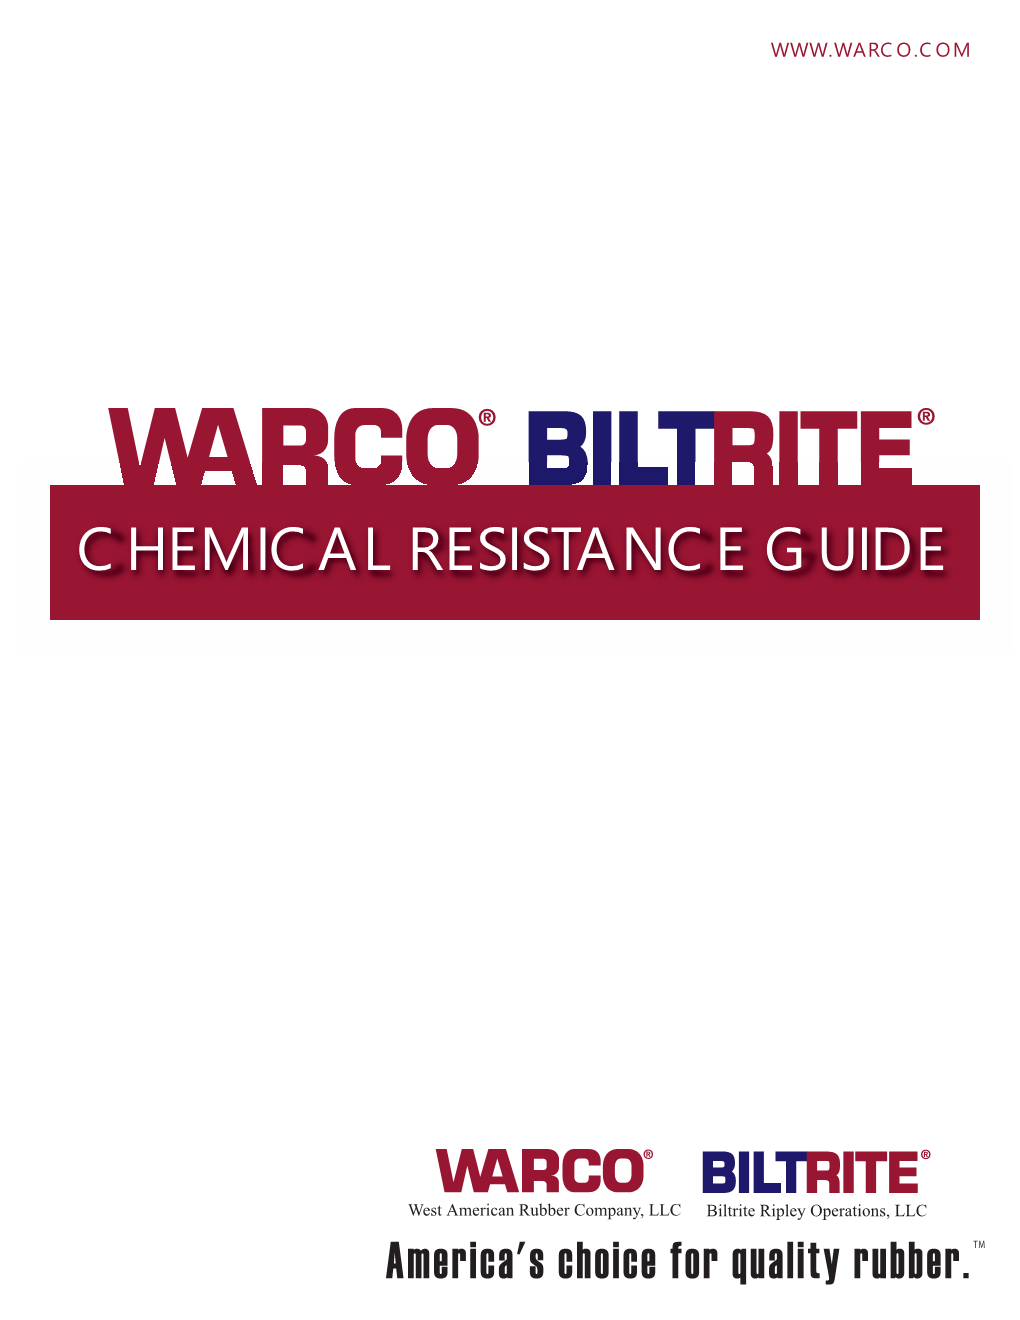 General Chemical Resistance Guide